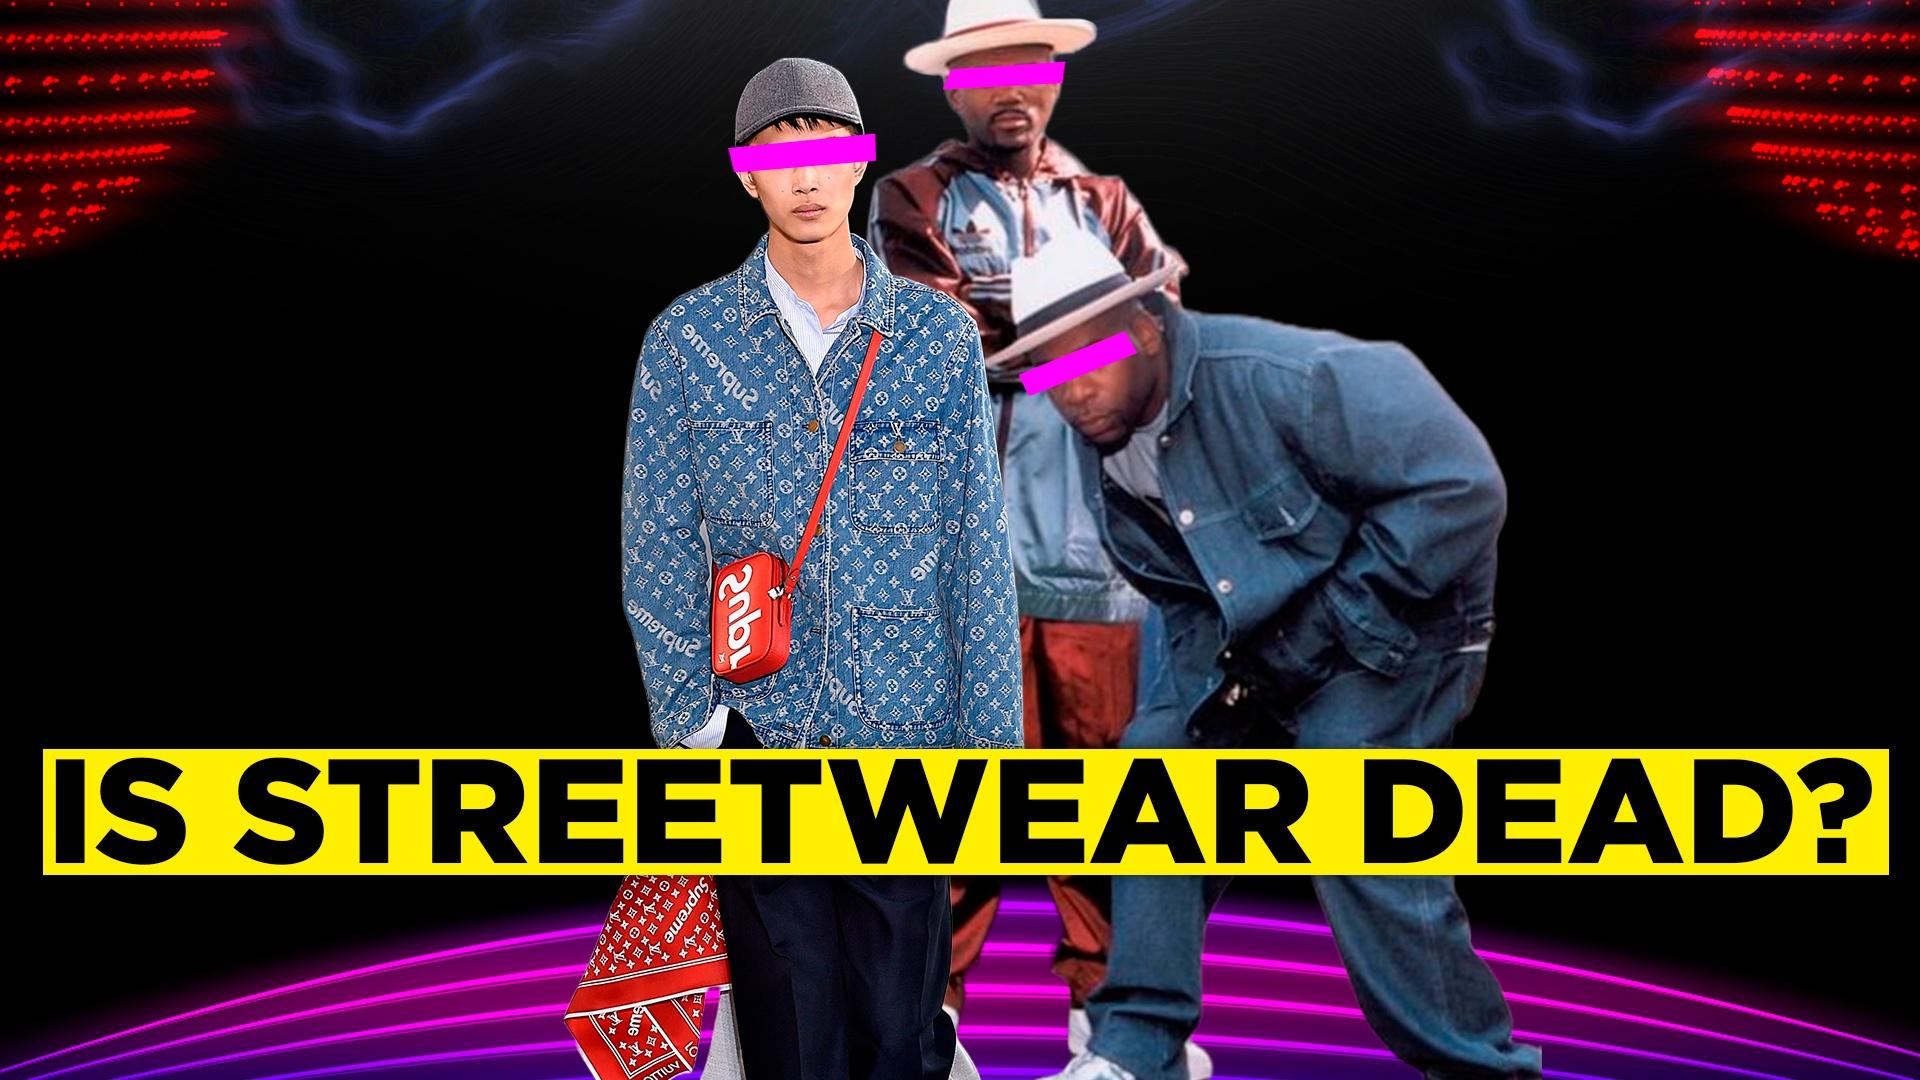 It doesn't mean what it used to': How the term 'streetwear' has